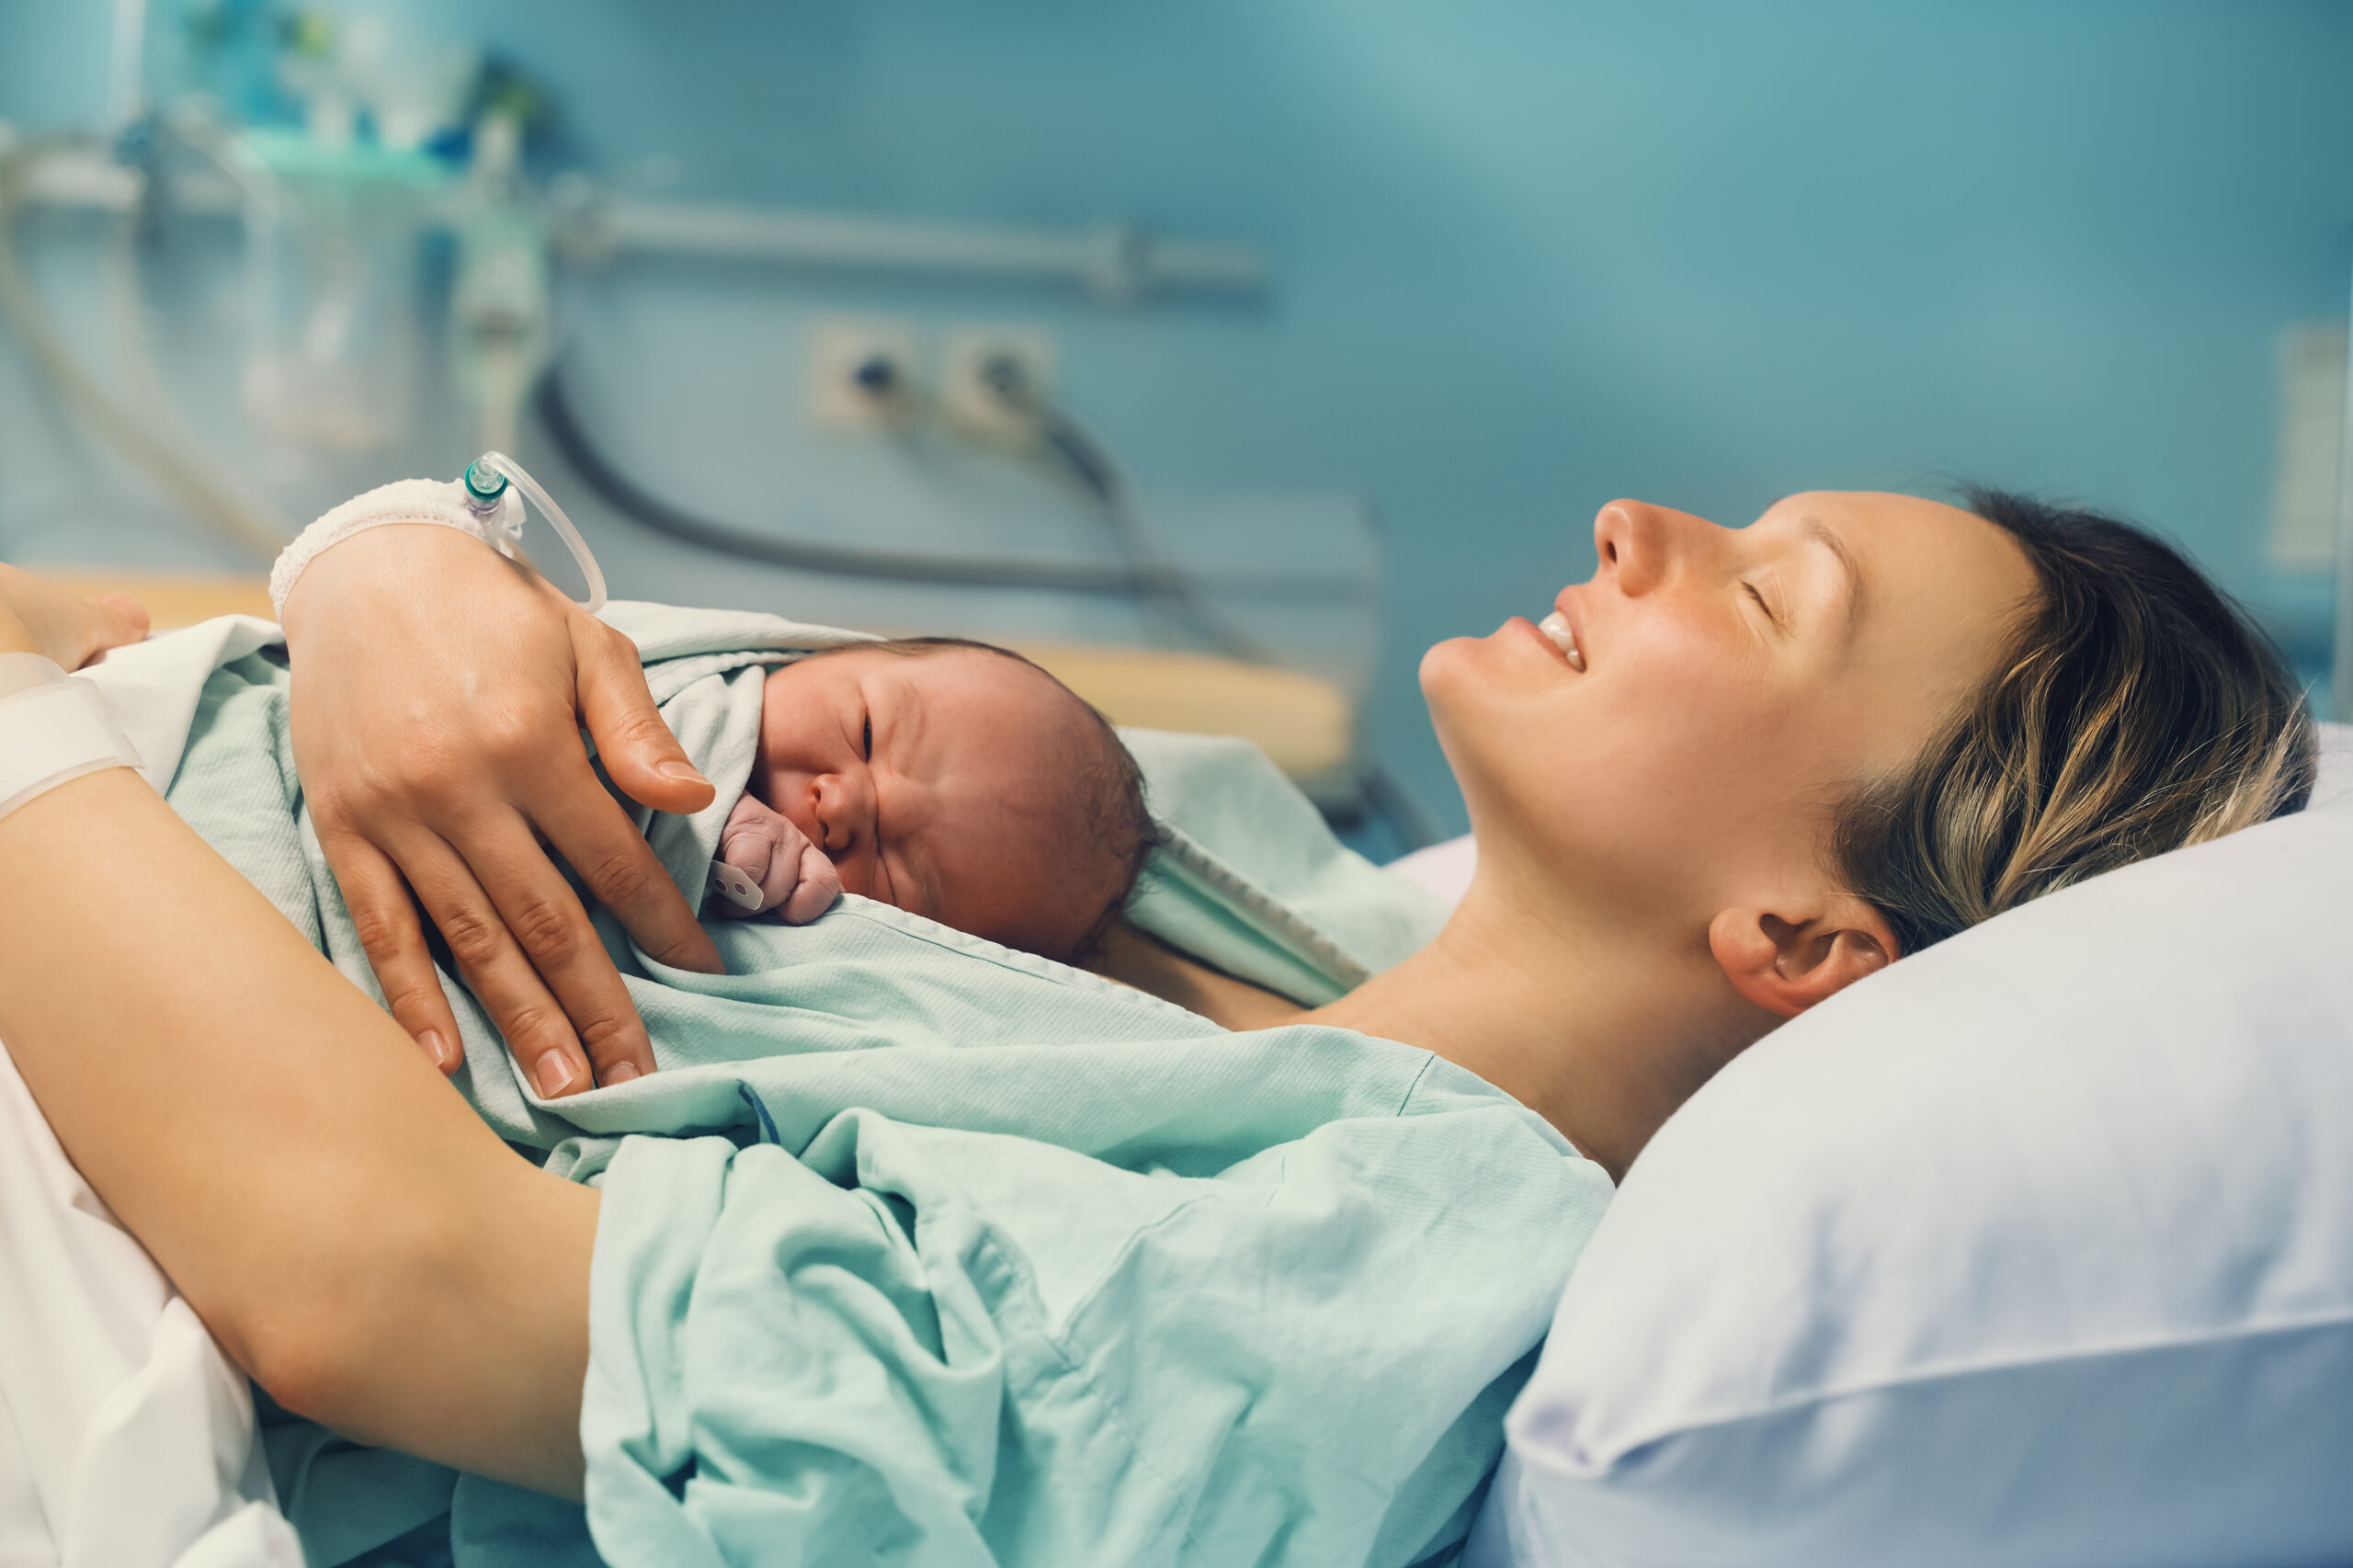 Labor and delivery mark the final stages of pregnancy, culminating in the birth of the baby